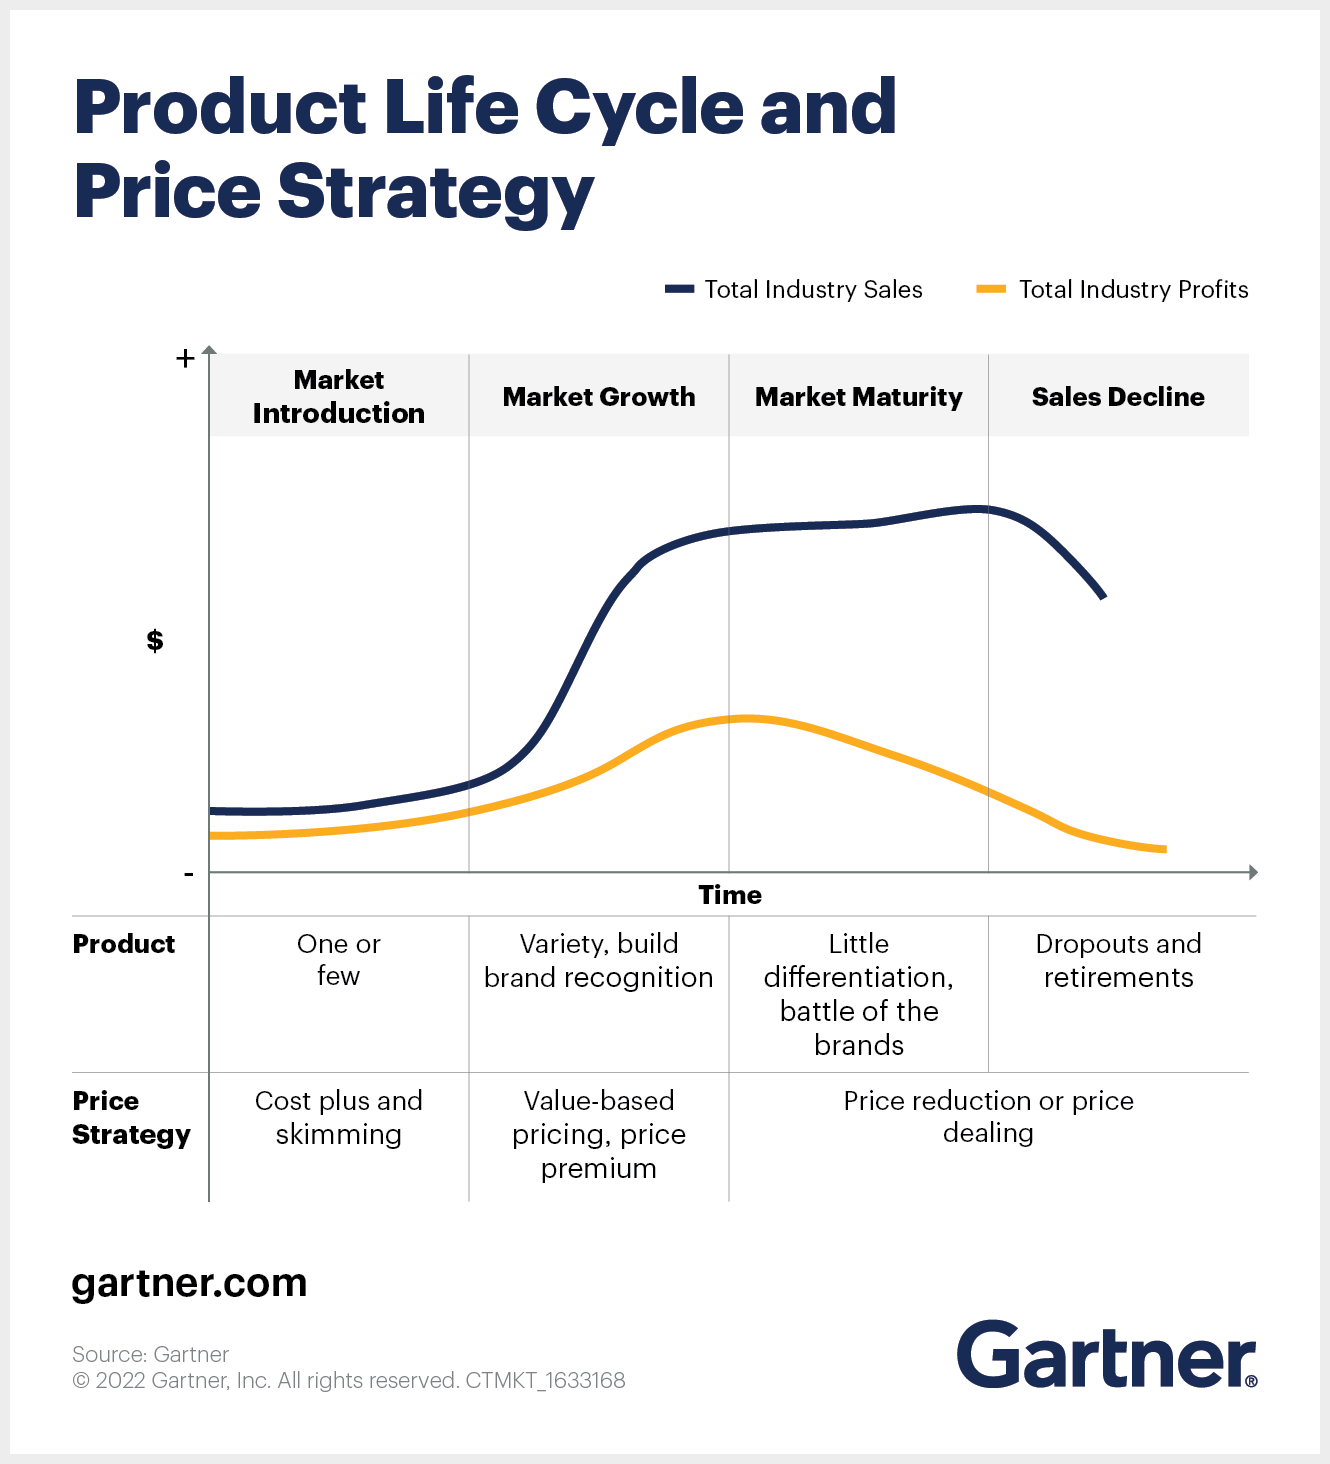 Product Life Cycle and Price Strategy